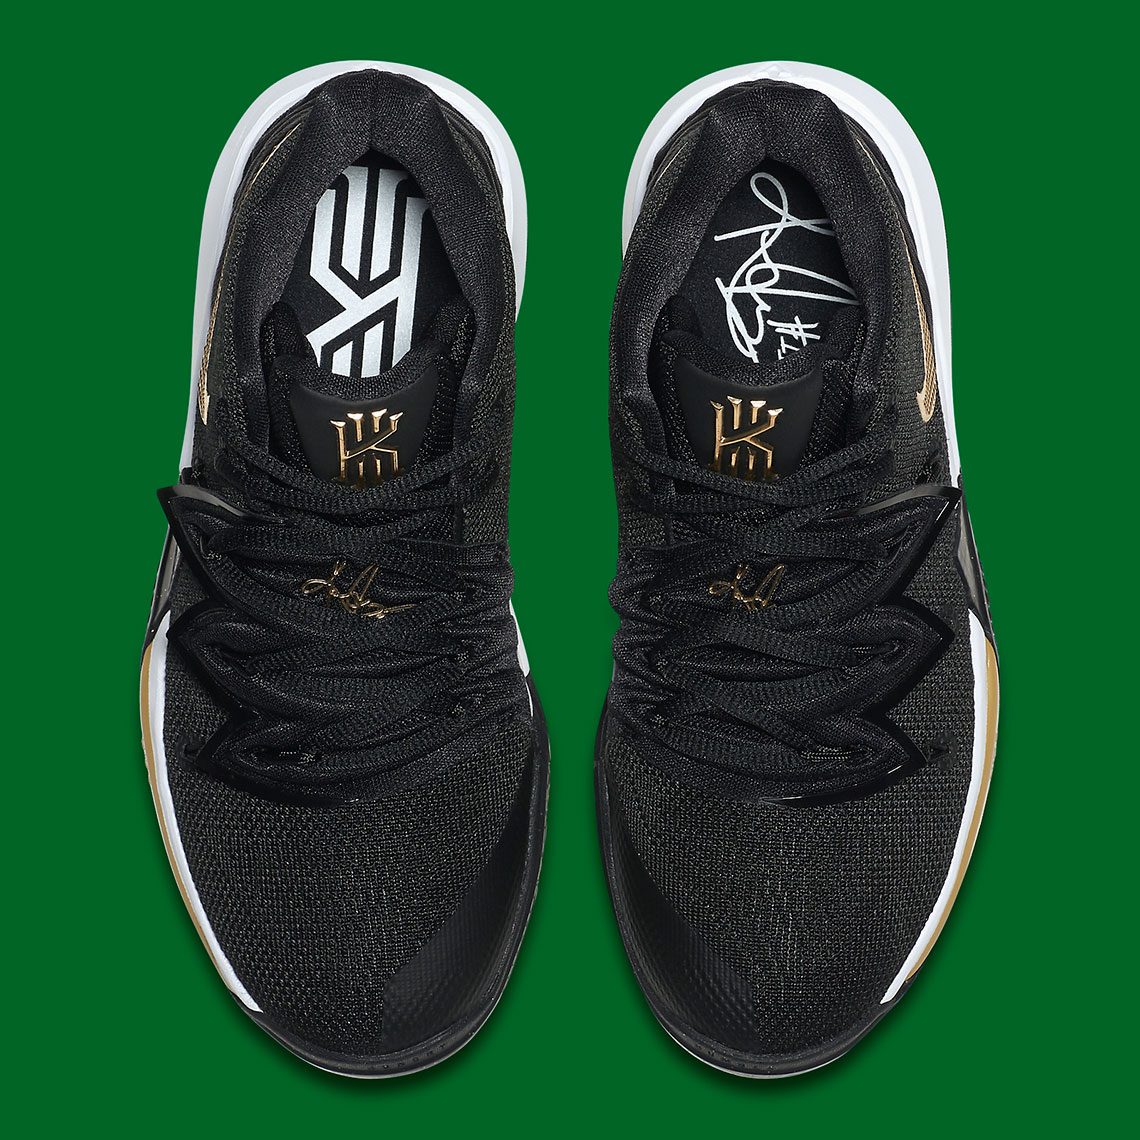 kyrie 5 shoes black and gold